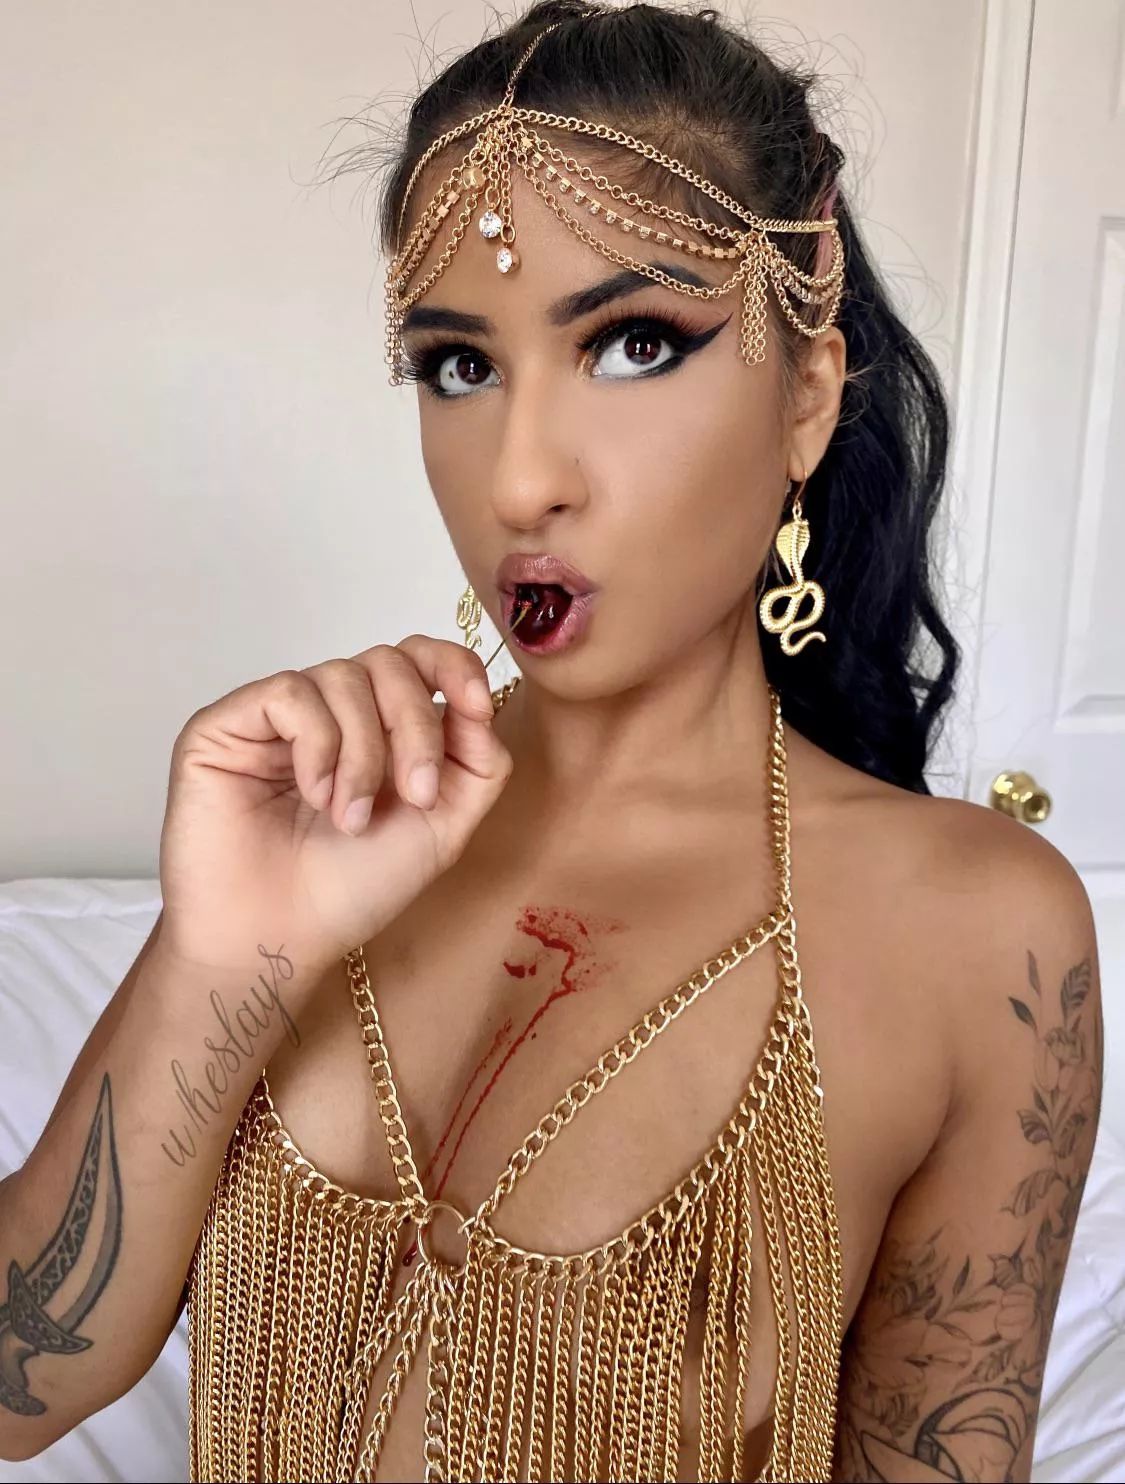 Cleopatra has an oral fixation 🍒